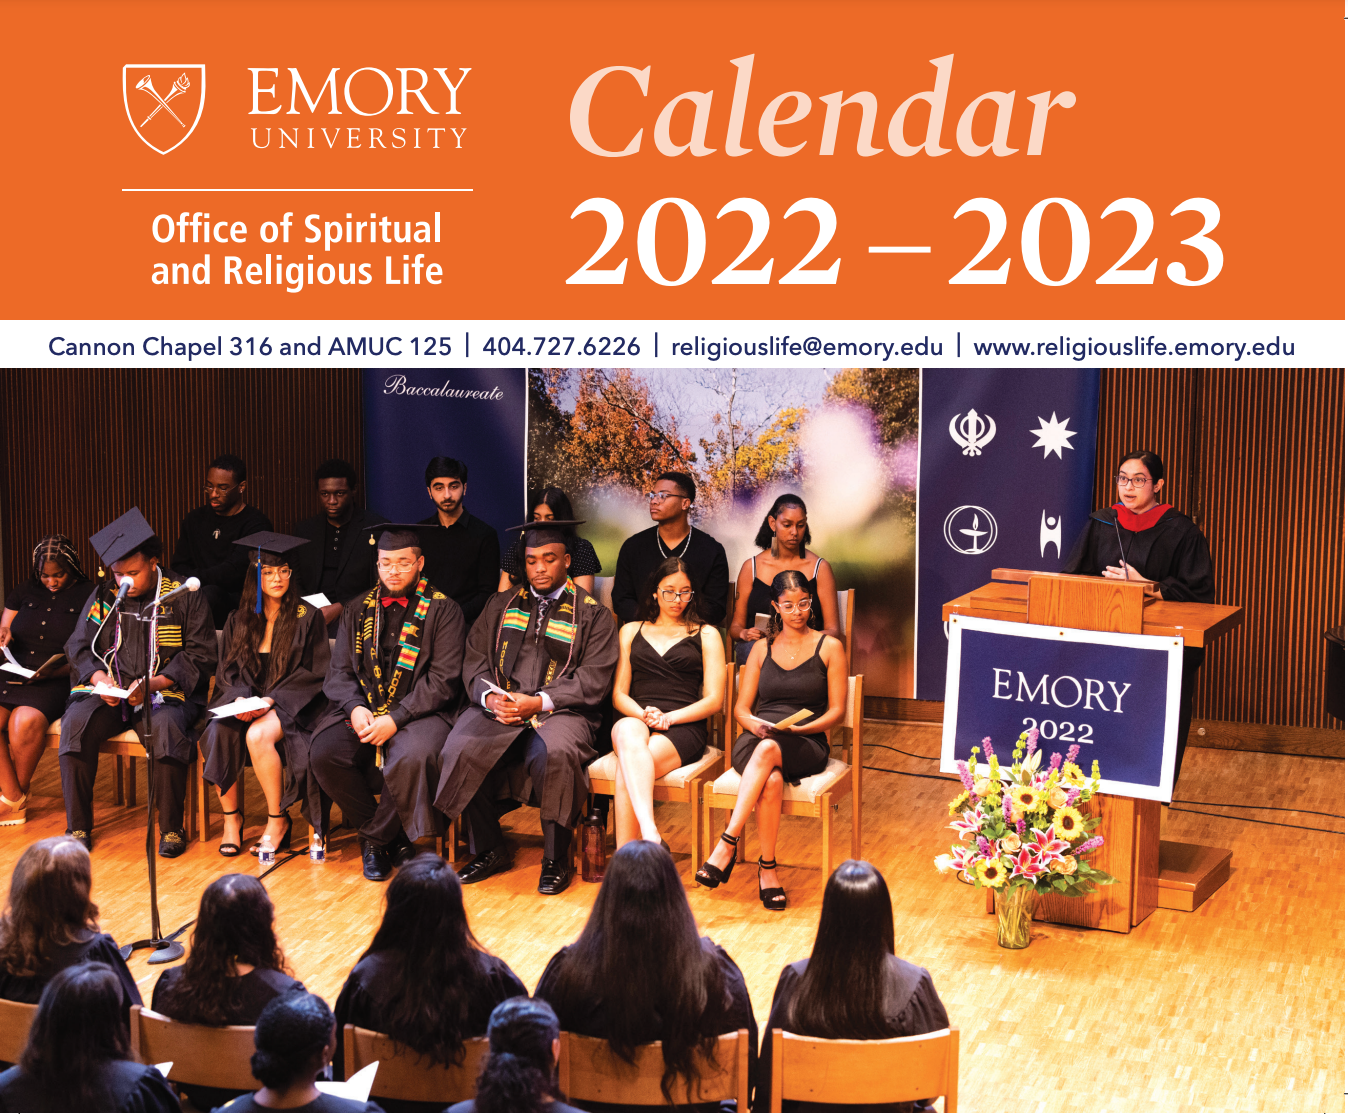 ORSL 2020-2021 Calendar with the Cannon Chapel on the cover